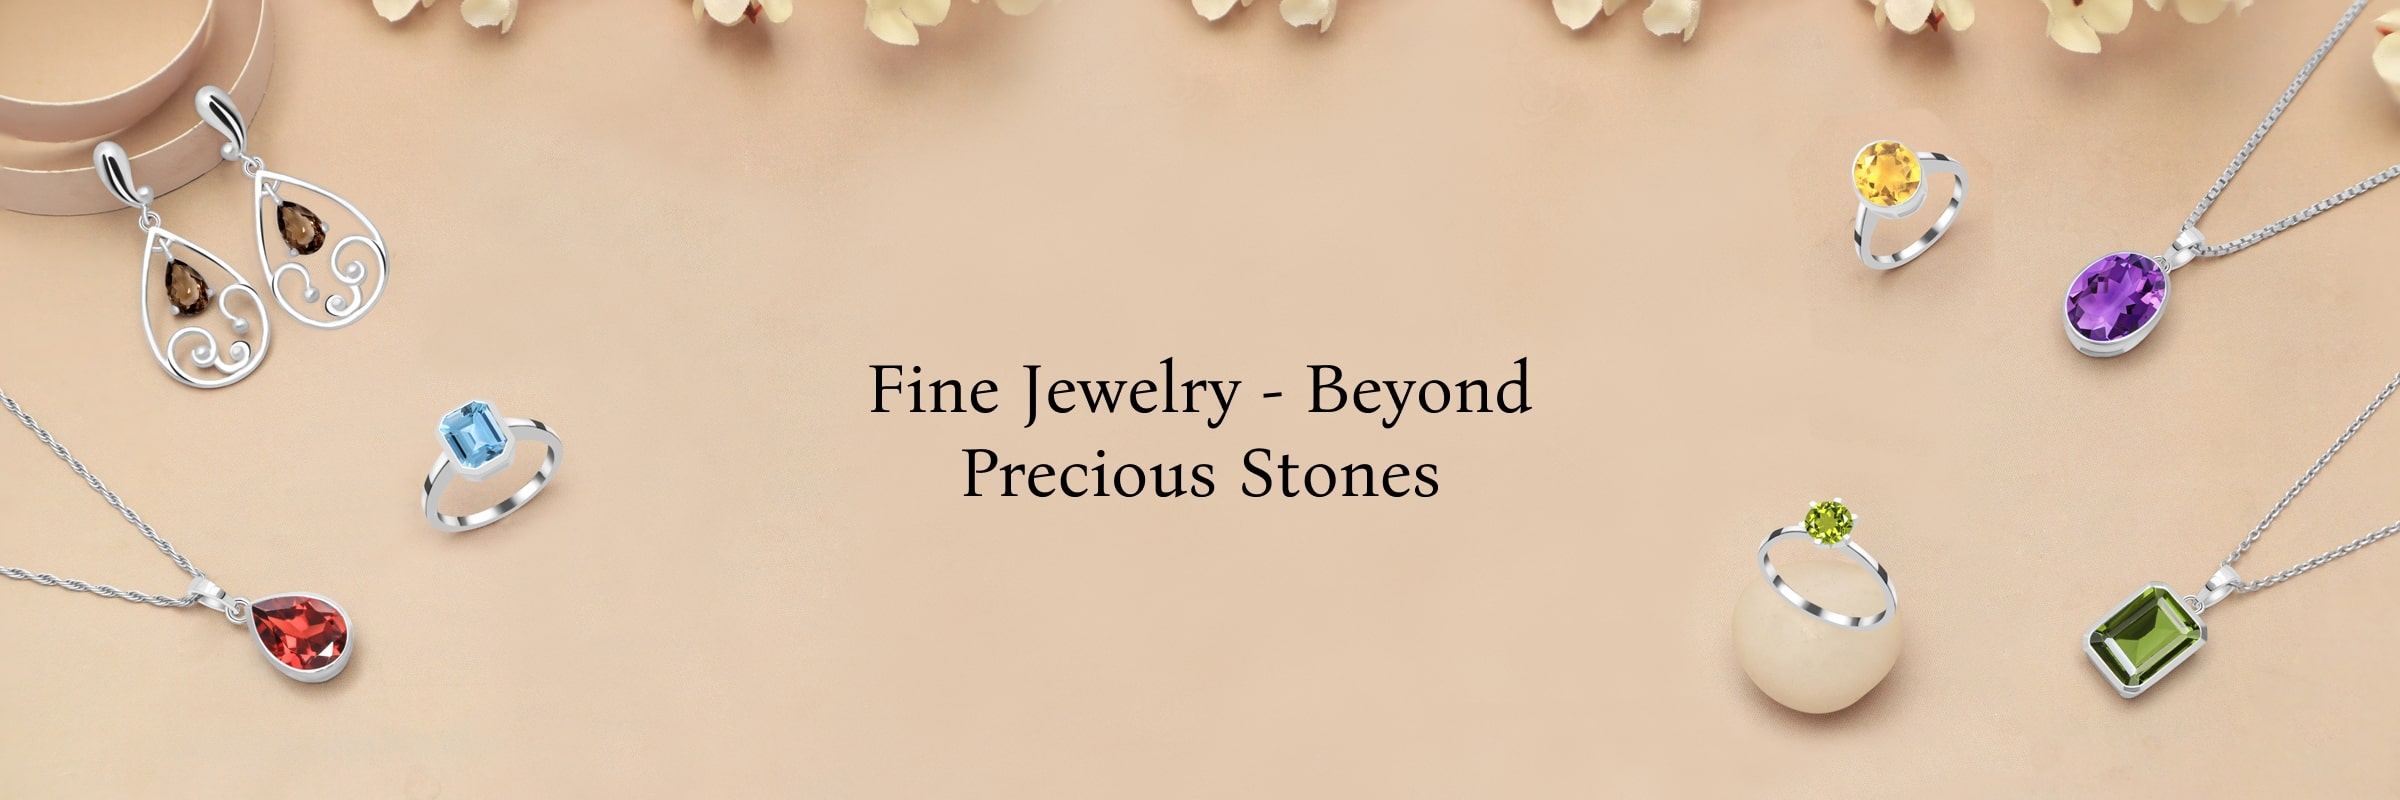 What is Fine Jewelry